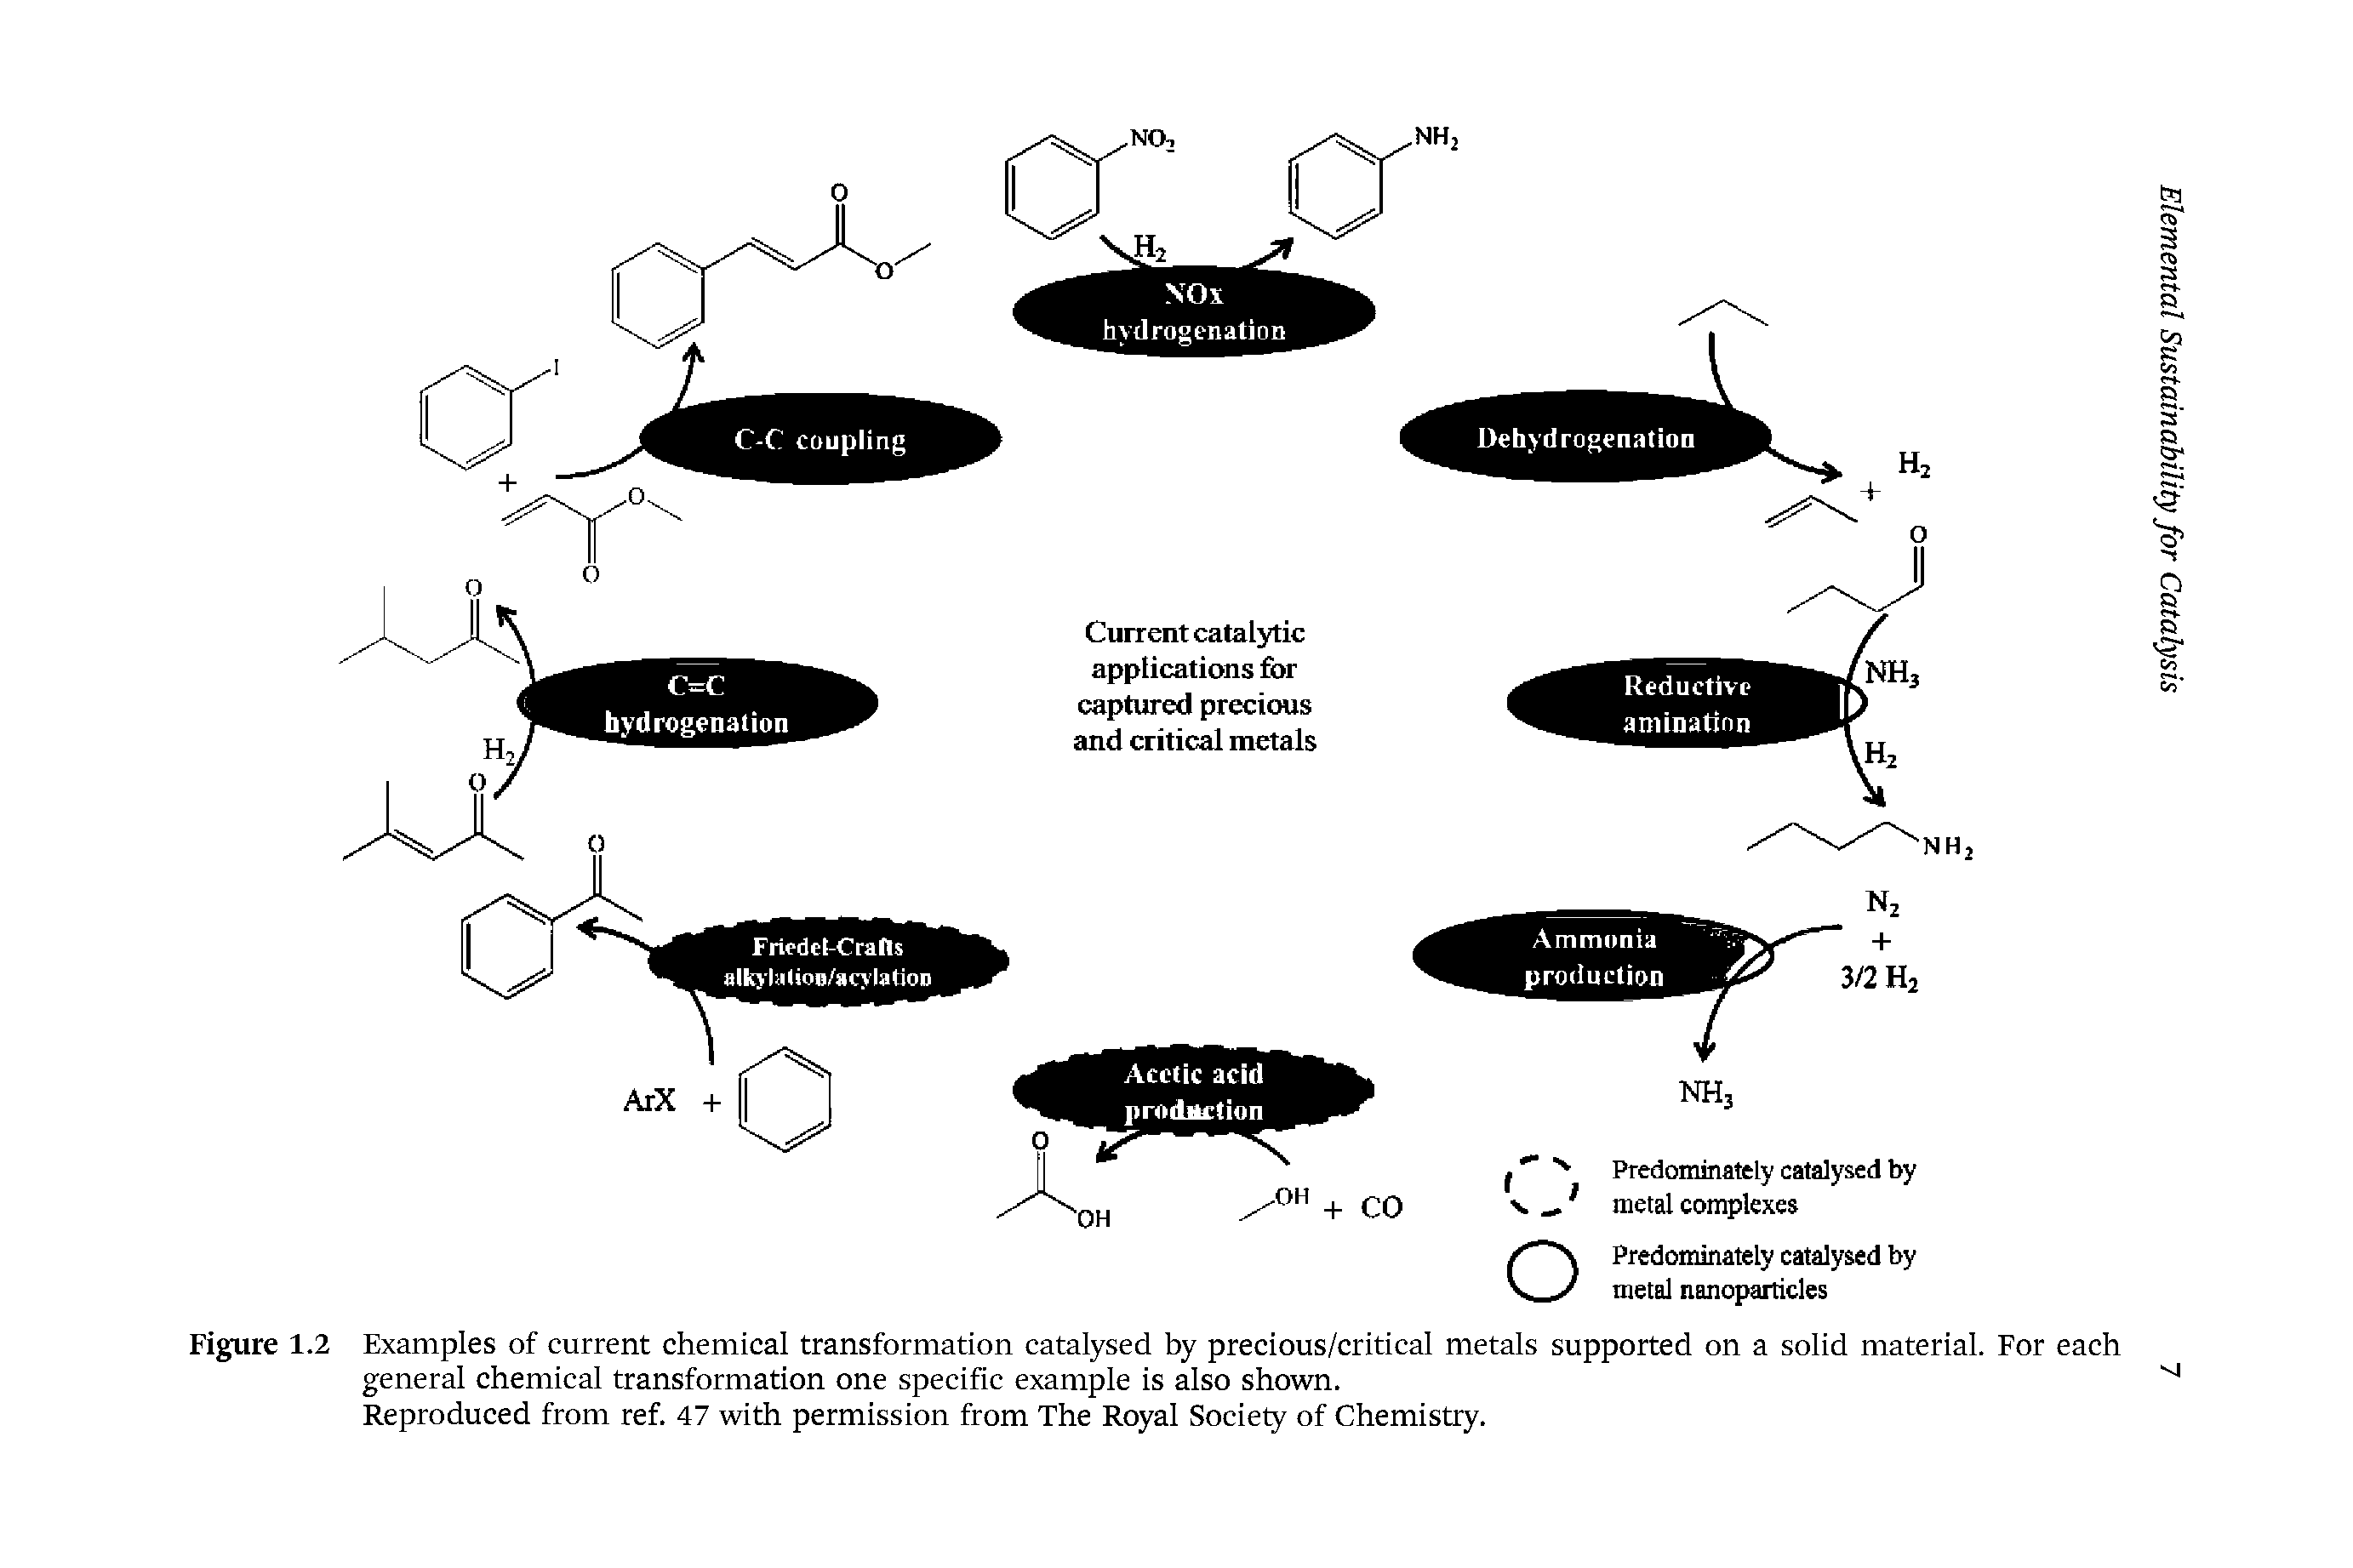 Figure 1.2 Examples of current chemical transformation catalysed by precious/critical metals supported on a solid material. For each general chemical transformation one specific example is also shown.